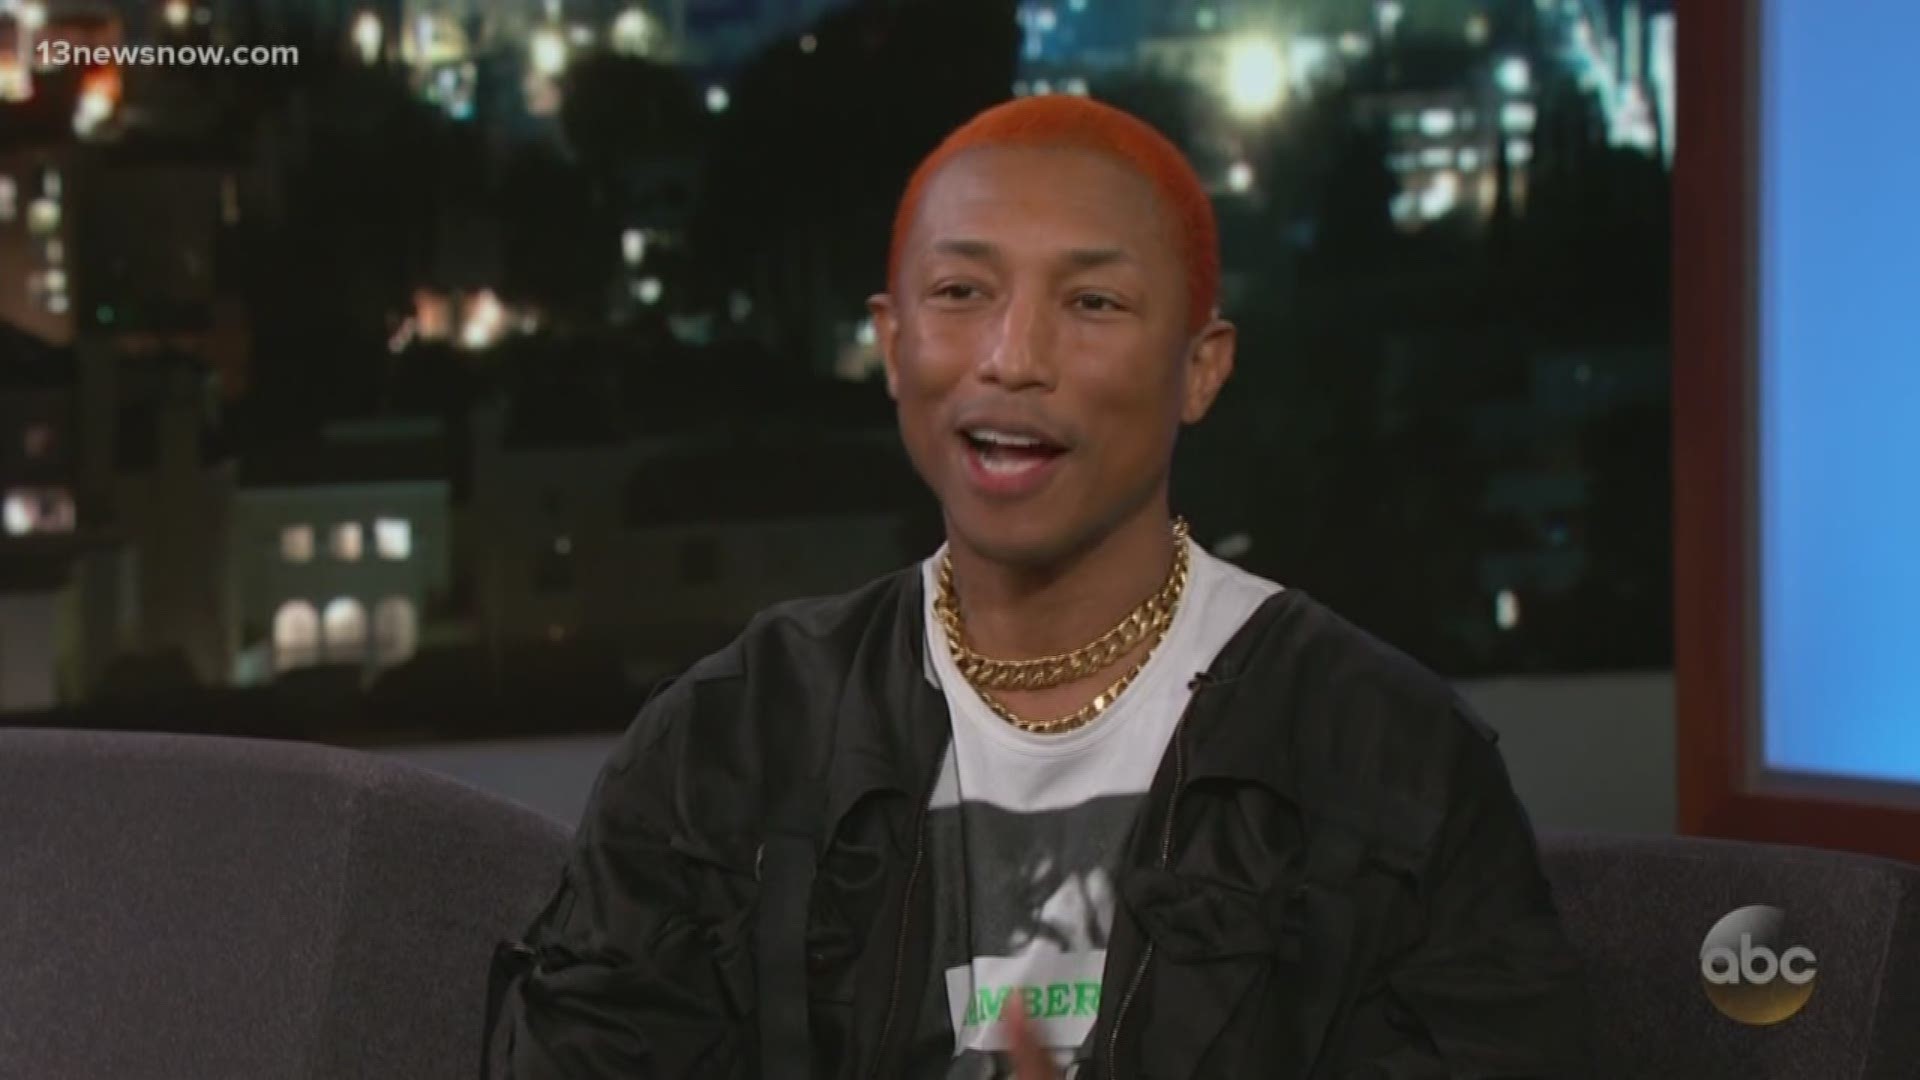 We could learn on Tuesday who is headlining music producer Pharrell's 'Something in the Water' festival.